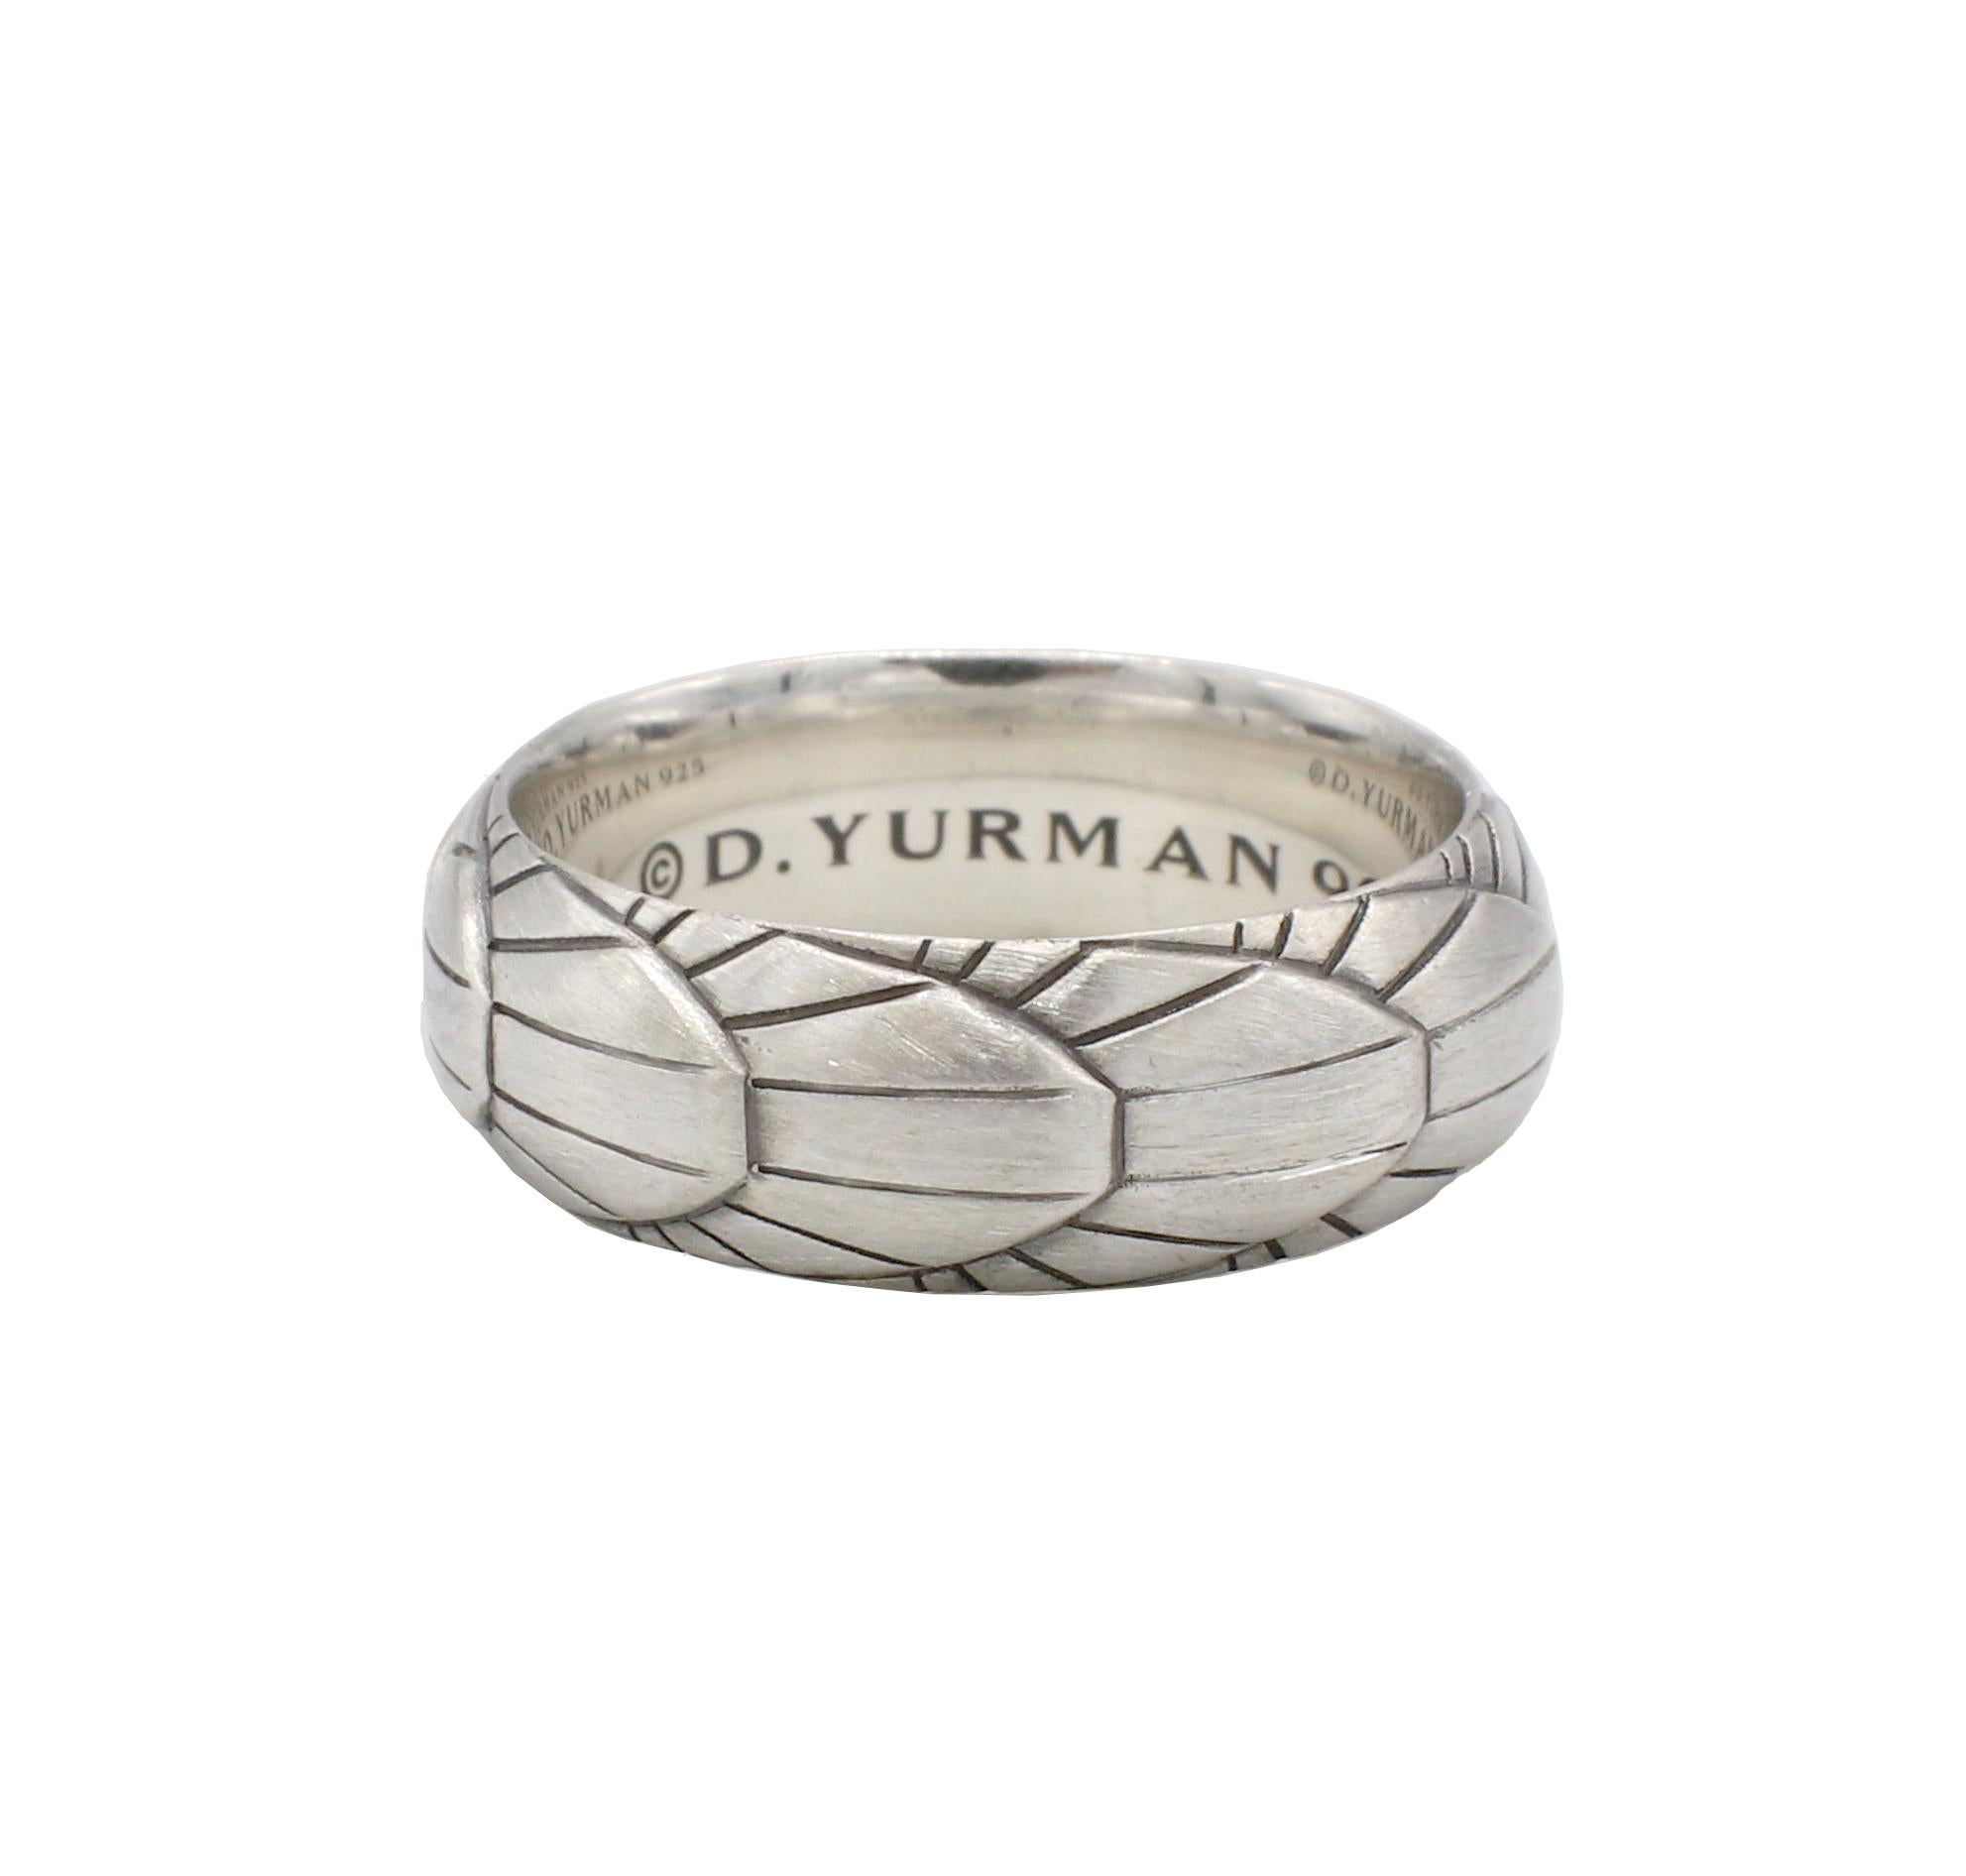 David Yurman Empire Sterling Silver Mens Band Ring 
Metal: Sterling silver
Weight: 8.68 grams
Width: 7.5mm
Size: 9.5 (US)
Retail: $495 USD
